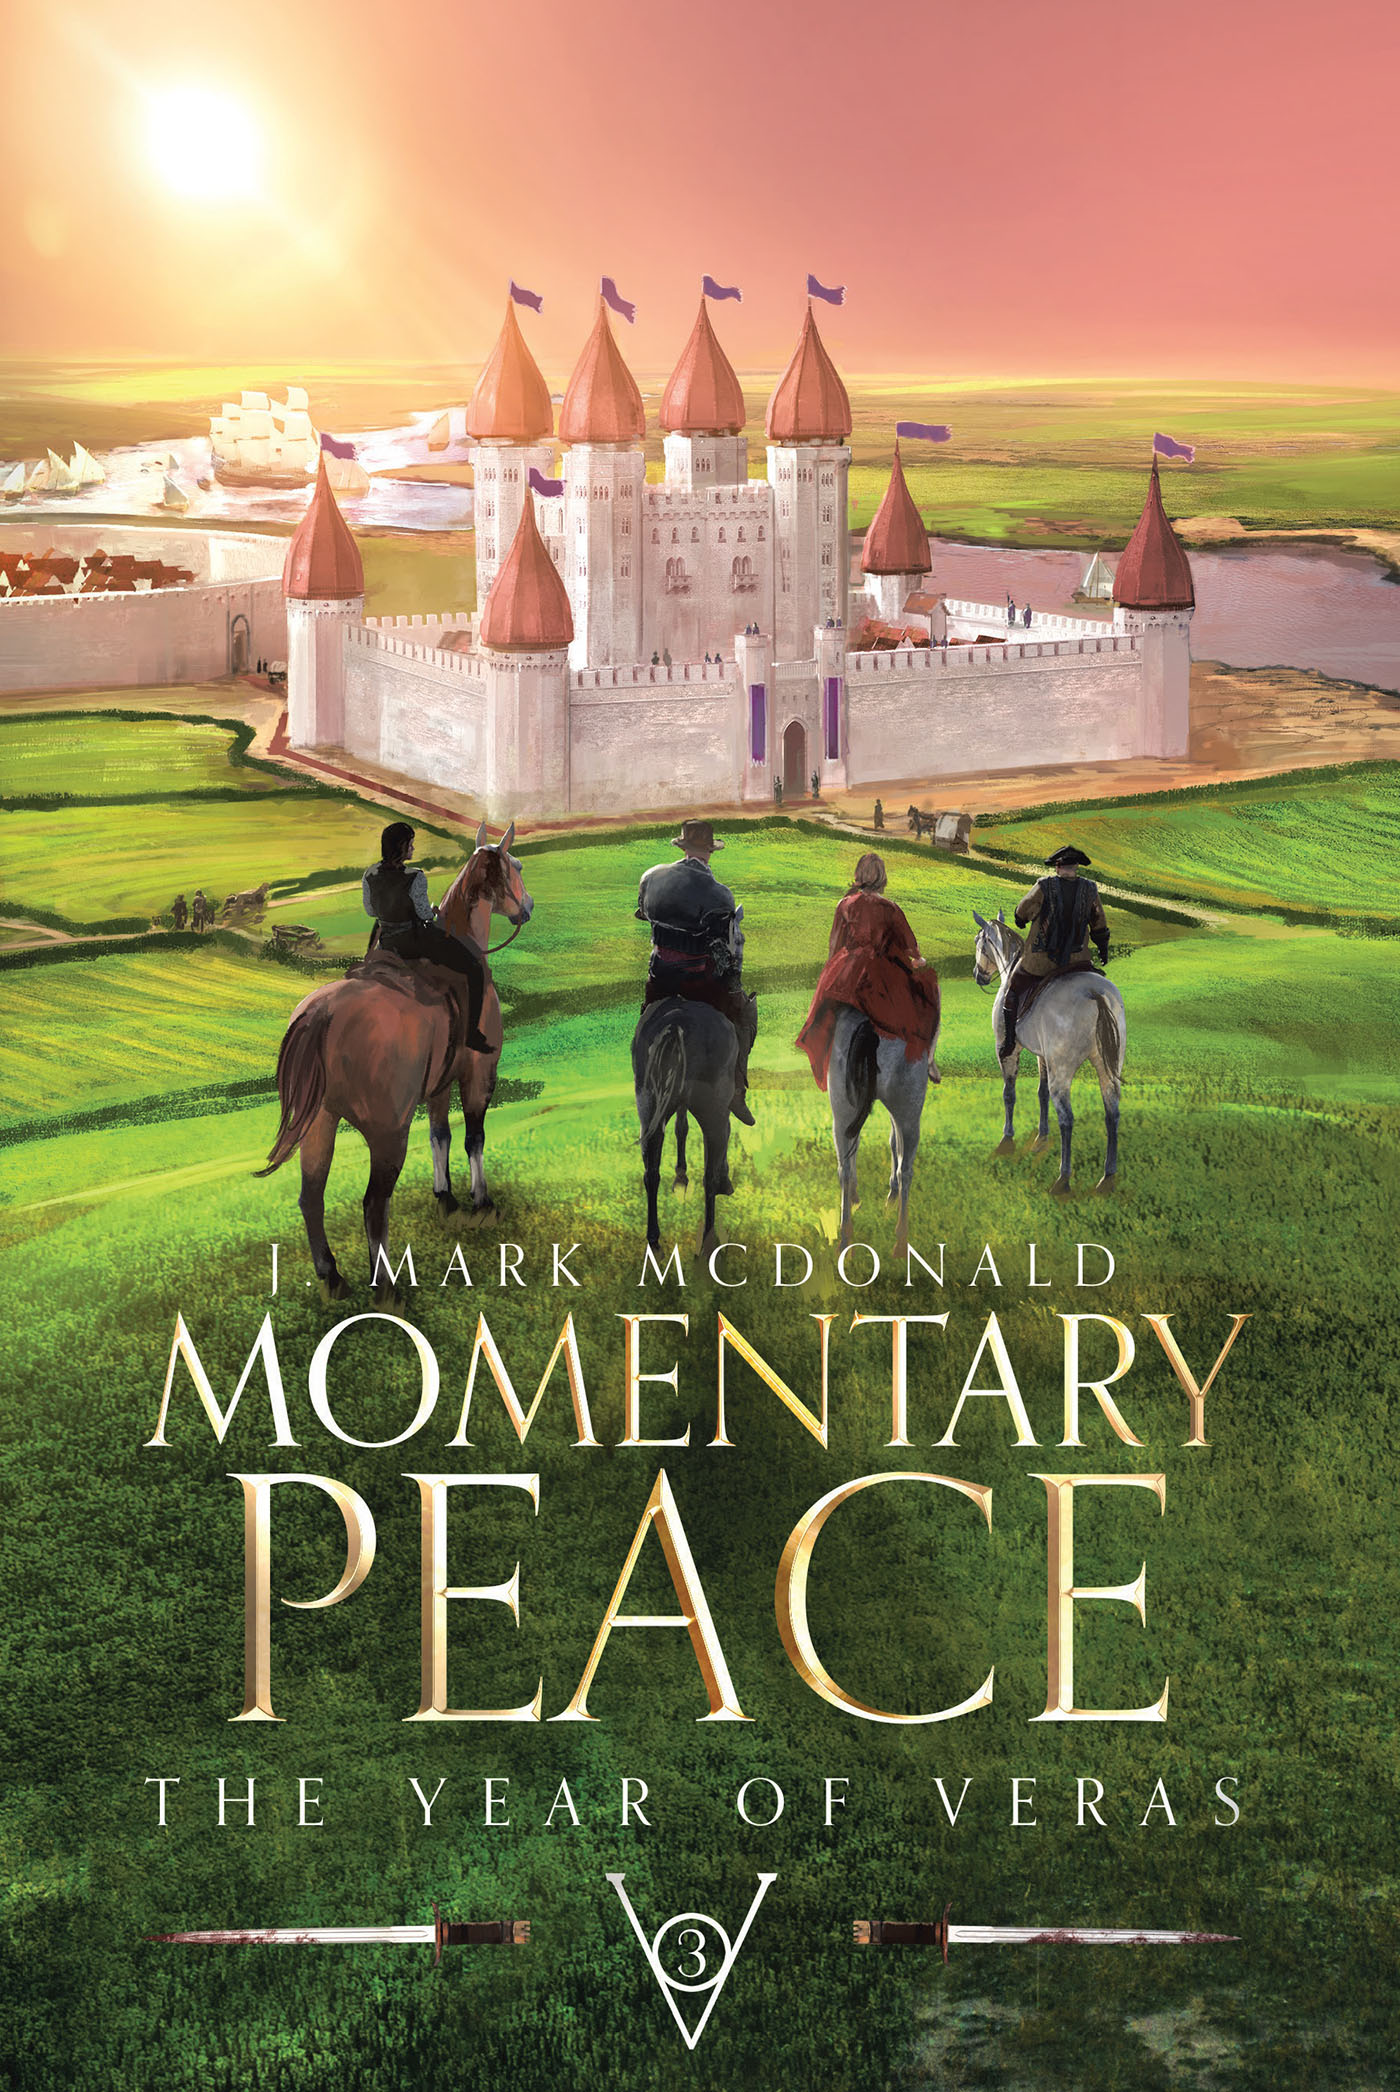 J. Mark McDonald’s Newly Released “Momentary Peace: The Year of Veras Book 3” is an Action-Packed Tale of a Fragile Truce and Surprising Twists of Fate